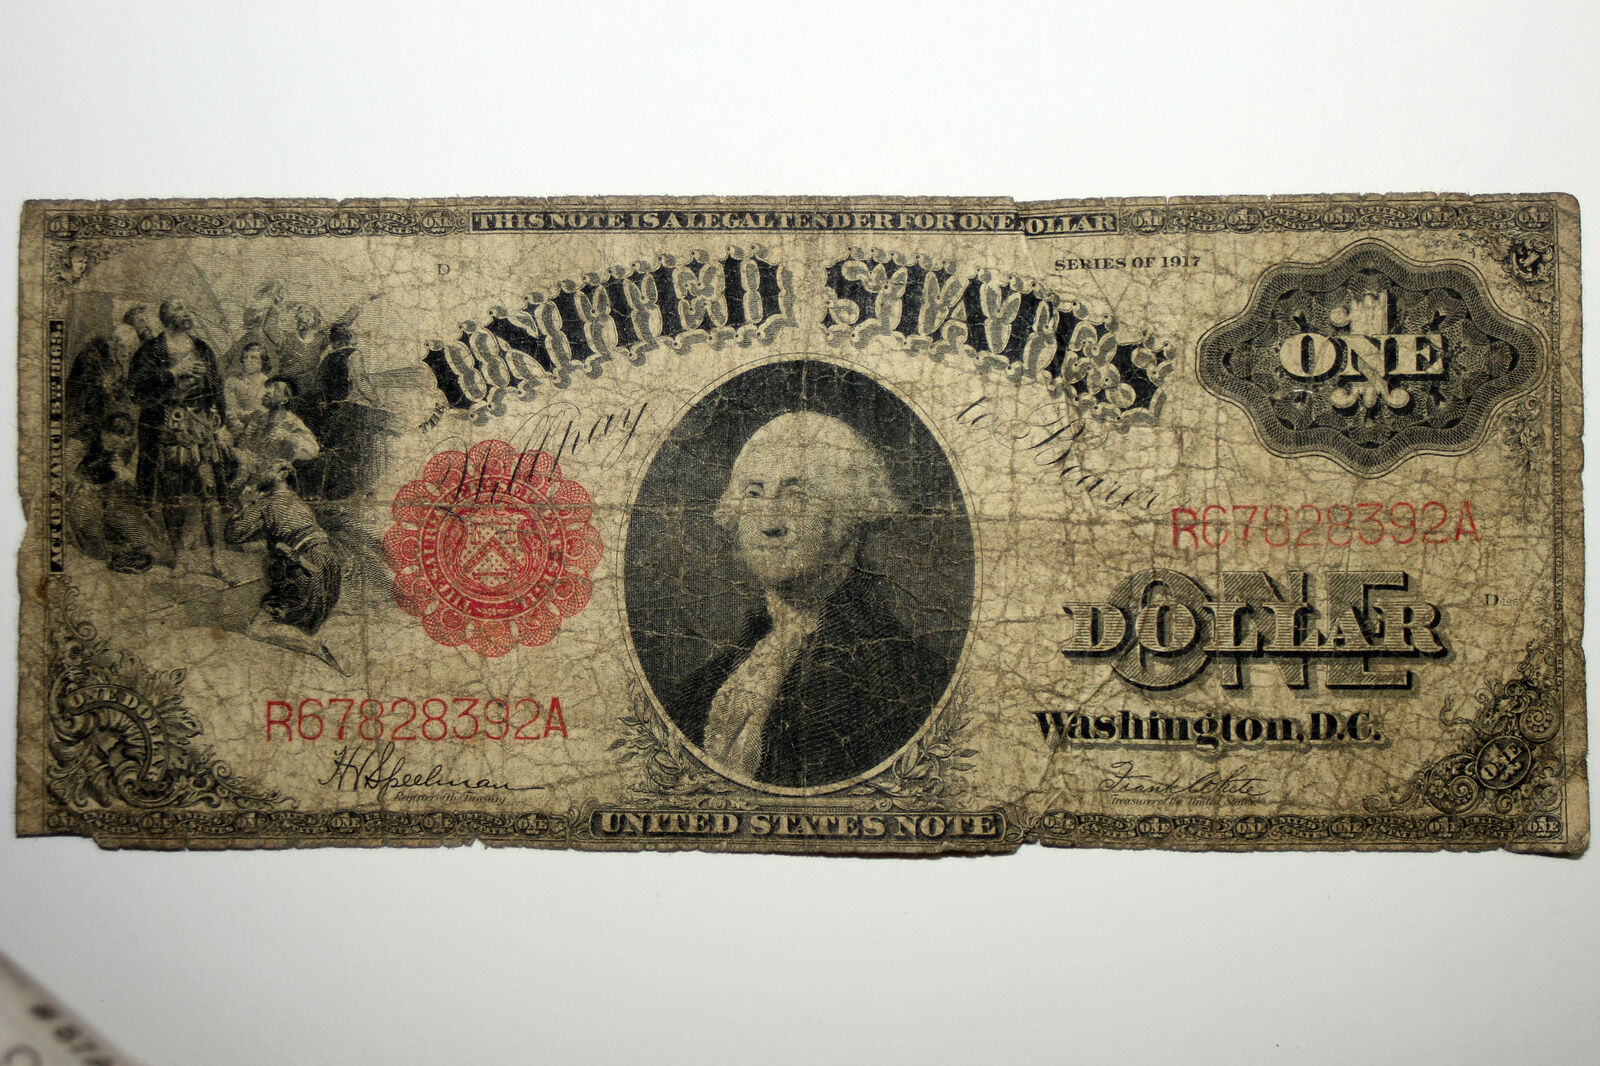 1917 Large Size Legal Tender $1.00 Us Note Grades Very Good (r67828392a)